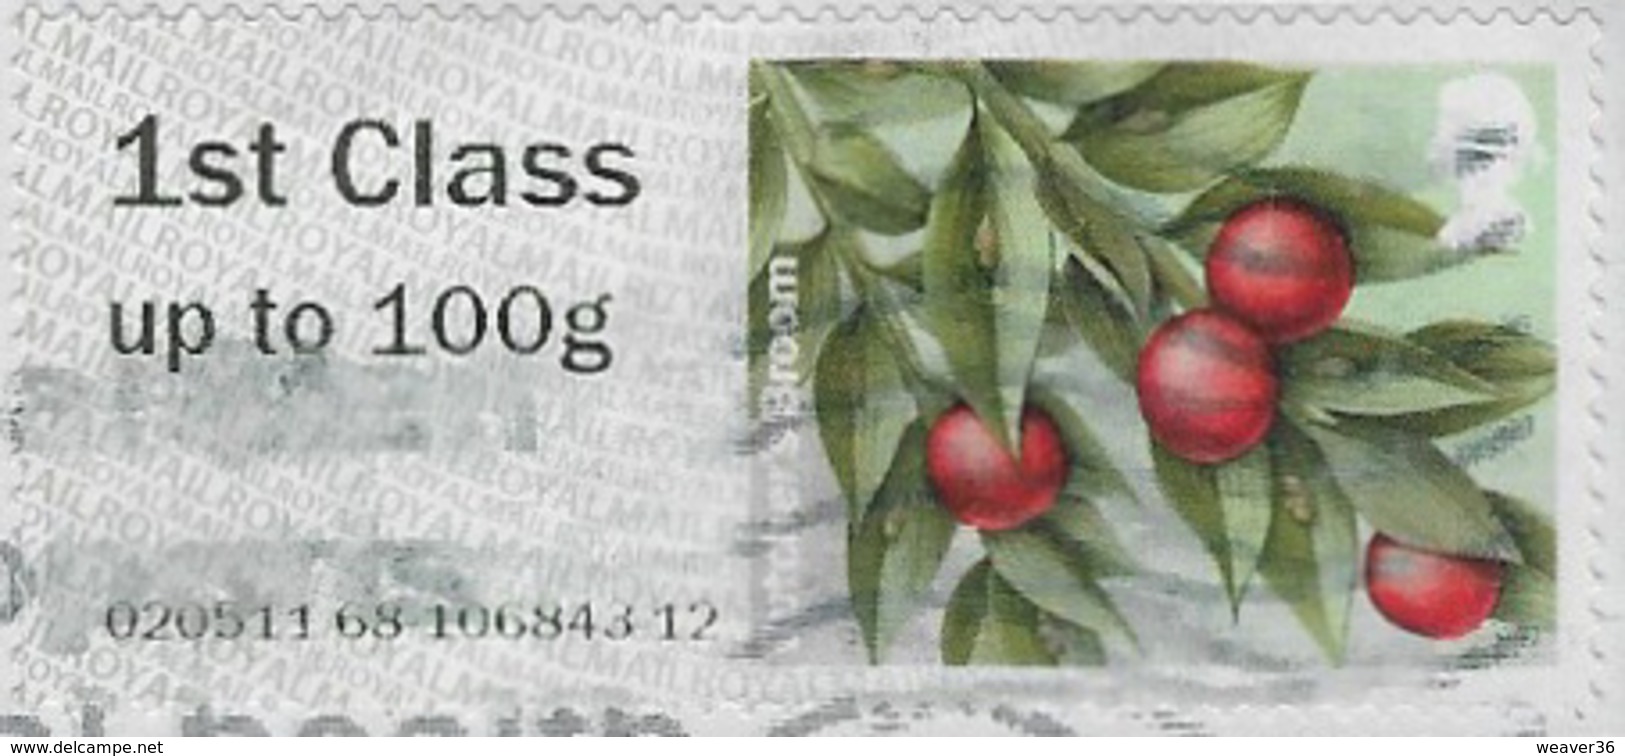 GB 2014 Winter Greenery 1st Type 4 Used Issuing Office 020511 [32/160/32D] - Post & Go Stamps